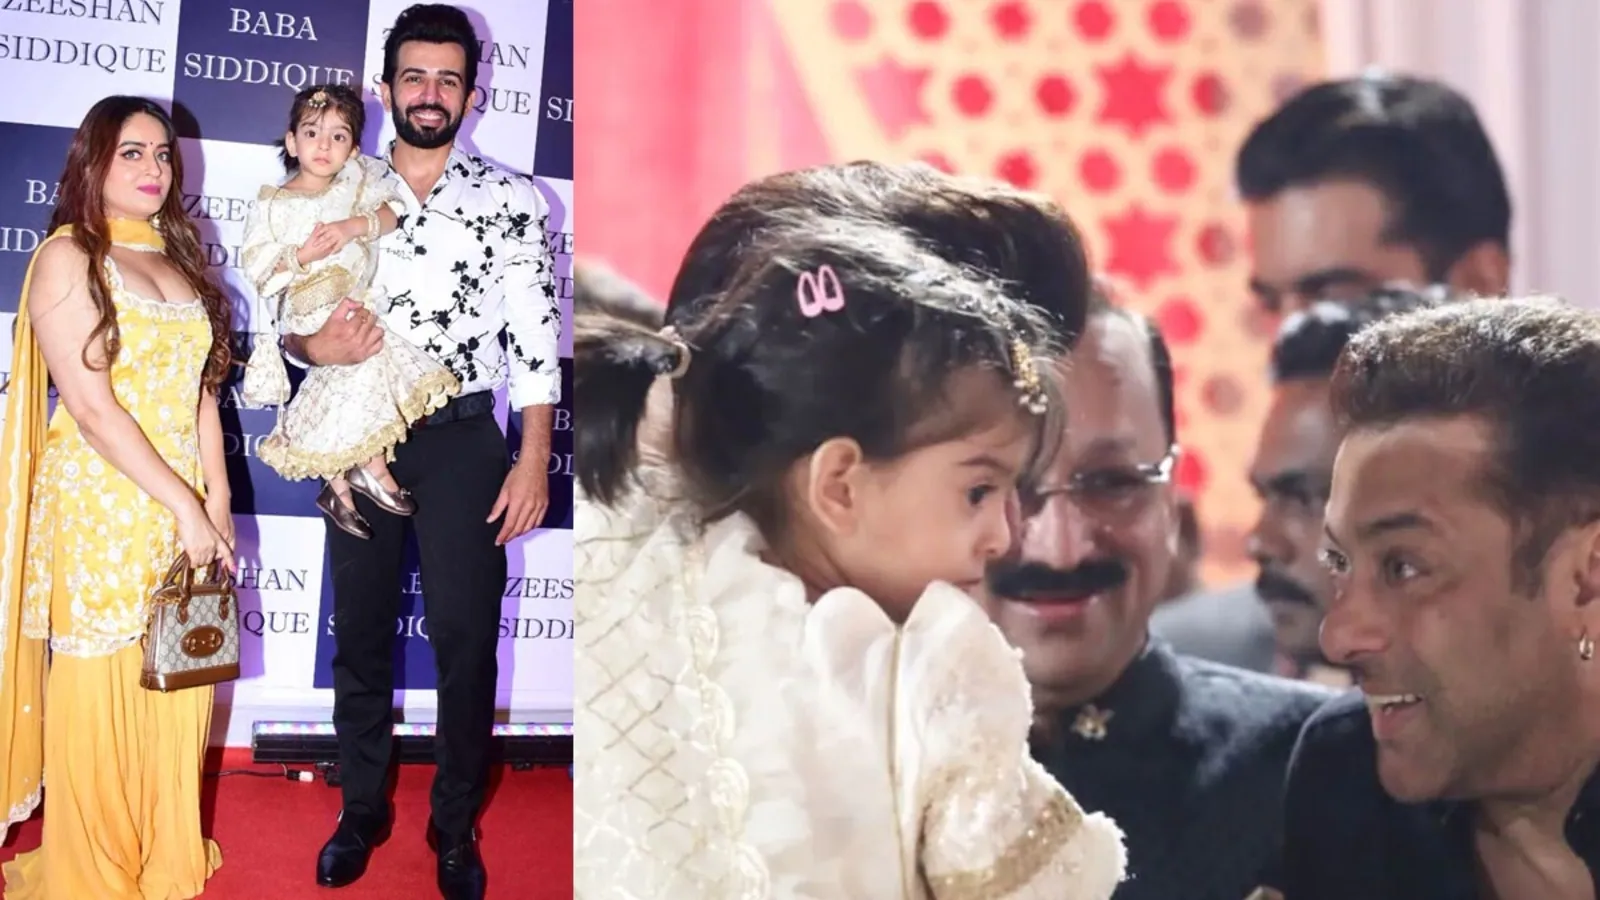 Salman Khan bonds with Jay Bhanushali-Mahhi Vij’s daughter at Baba Siddique’s bash, fans say he ‘will be a good father’